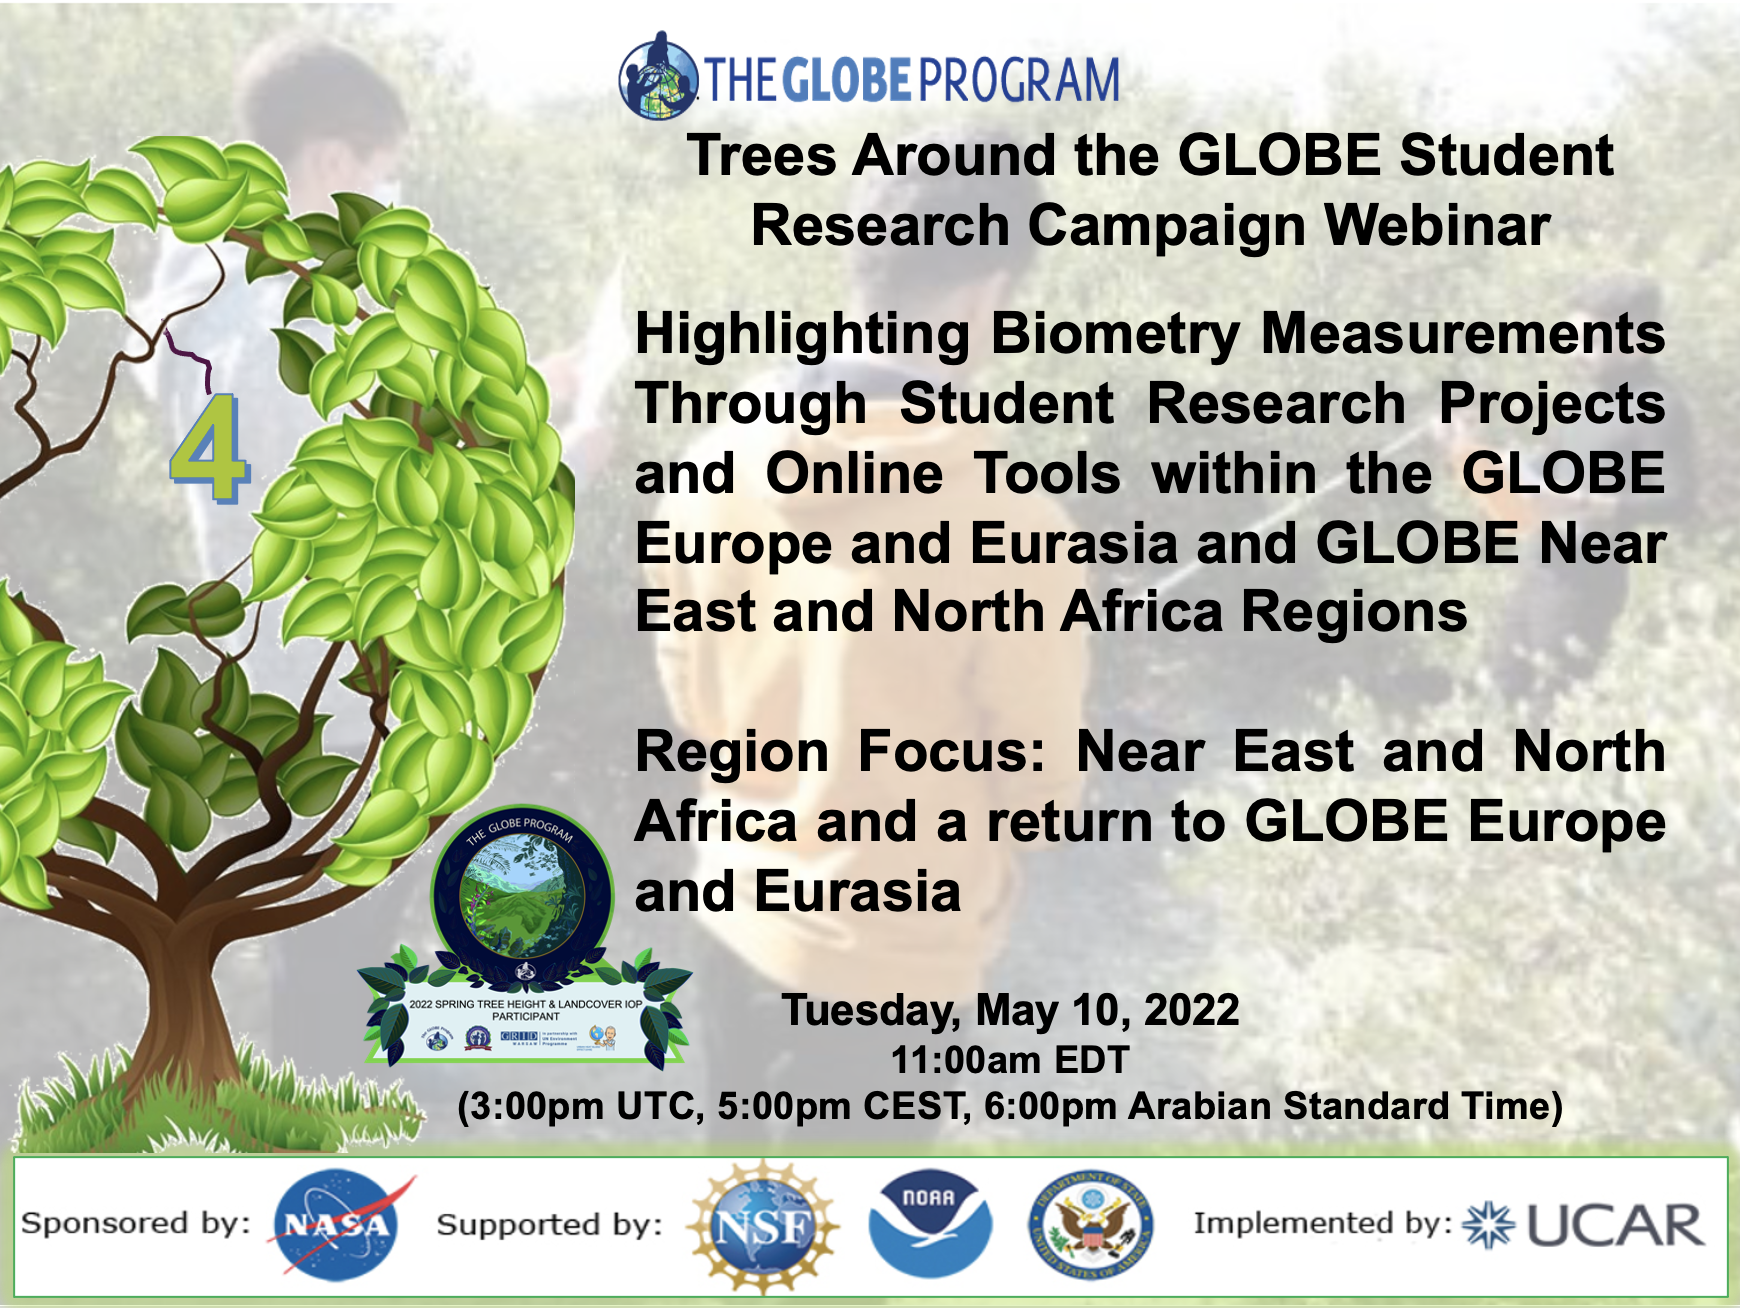 Trees Around the GLOBE 10 May webinar shareable, showing the title of the webinar